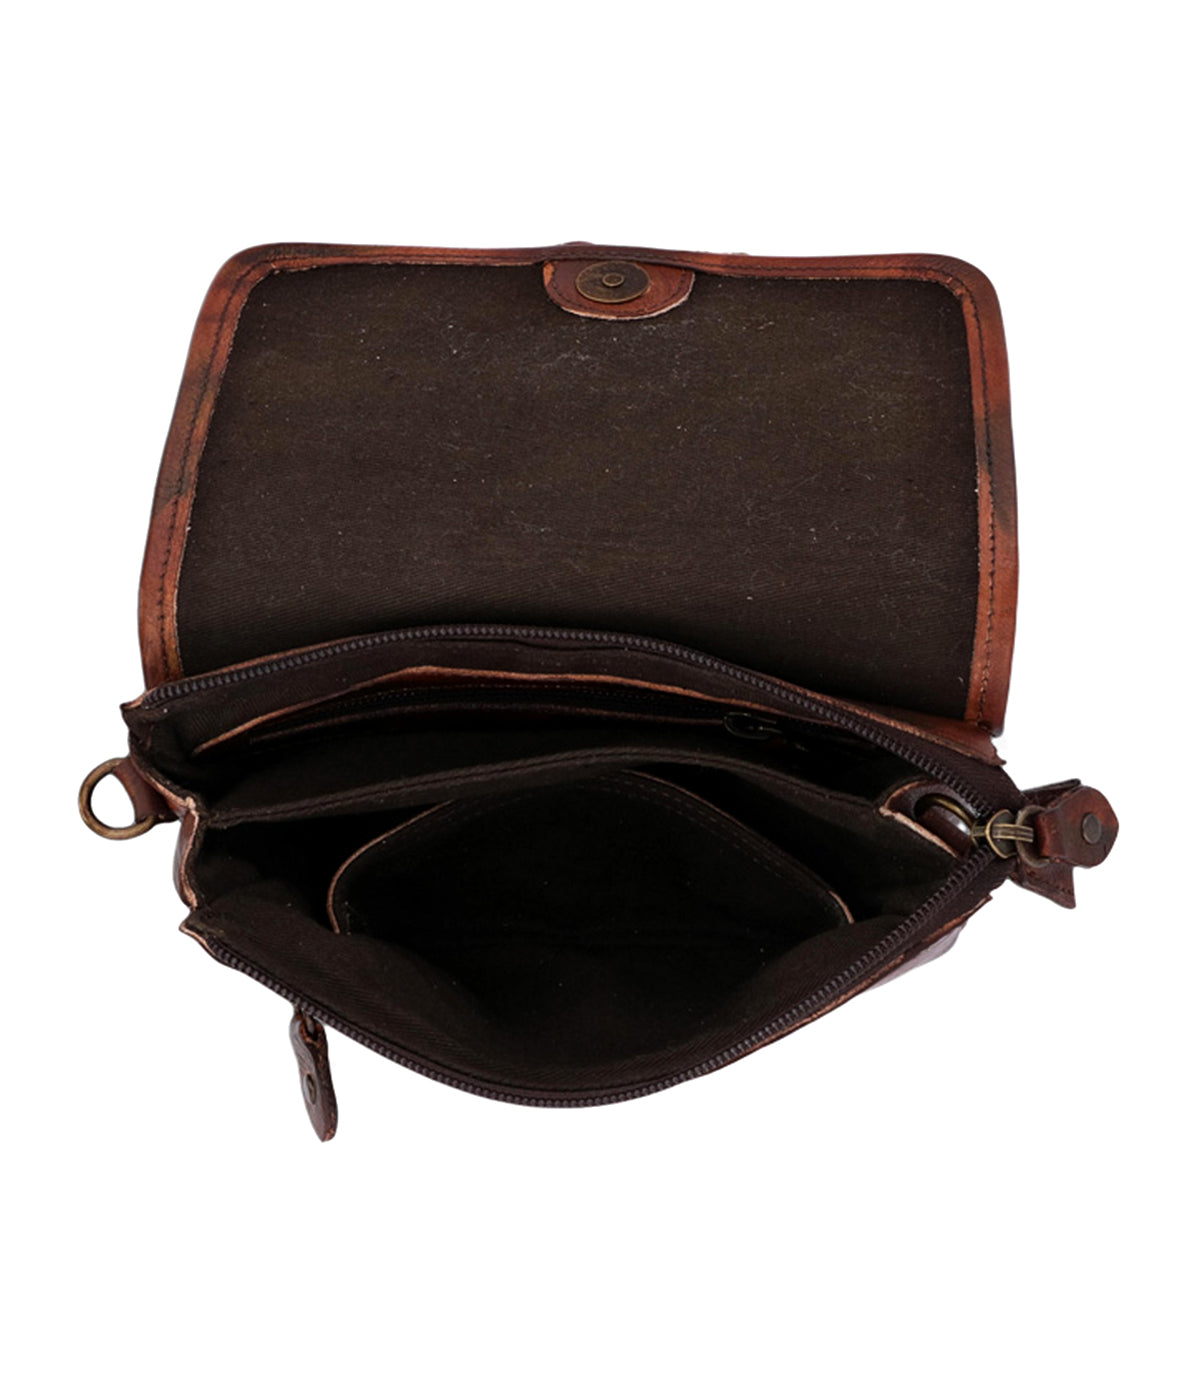 A Ziggy messenger bag by Bed Stu, made of brown leather with two compartments.